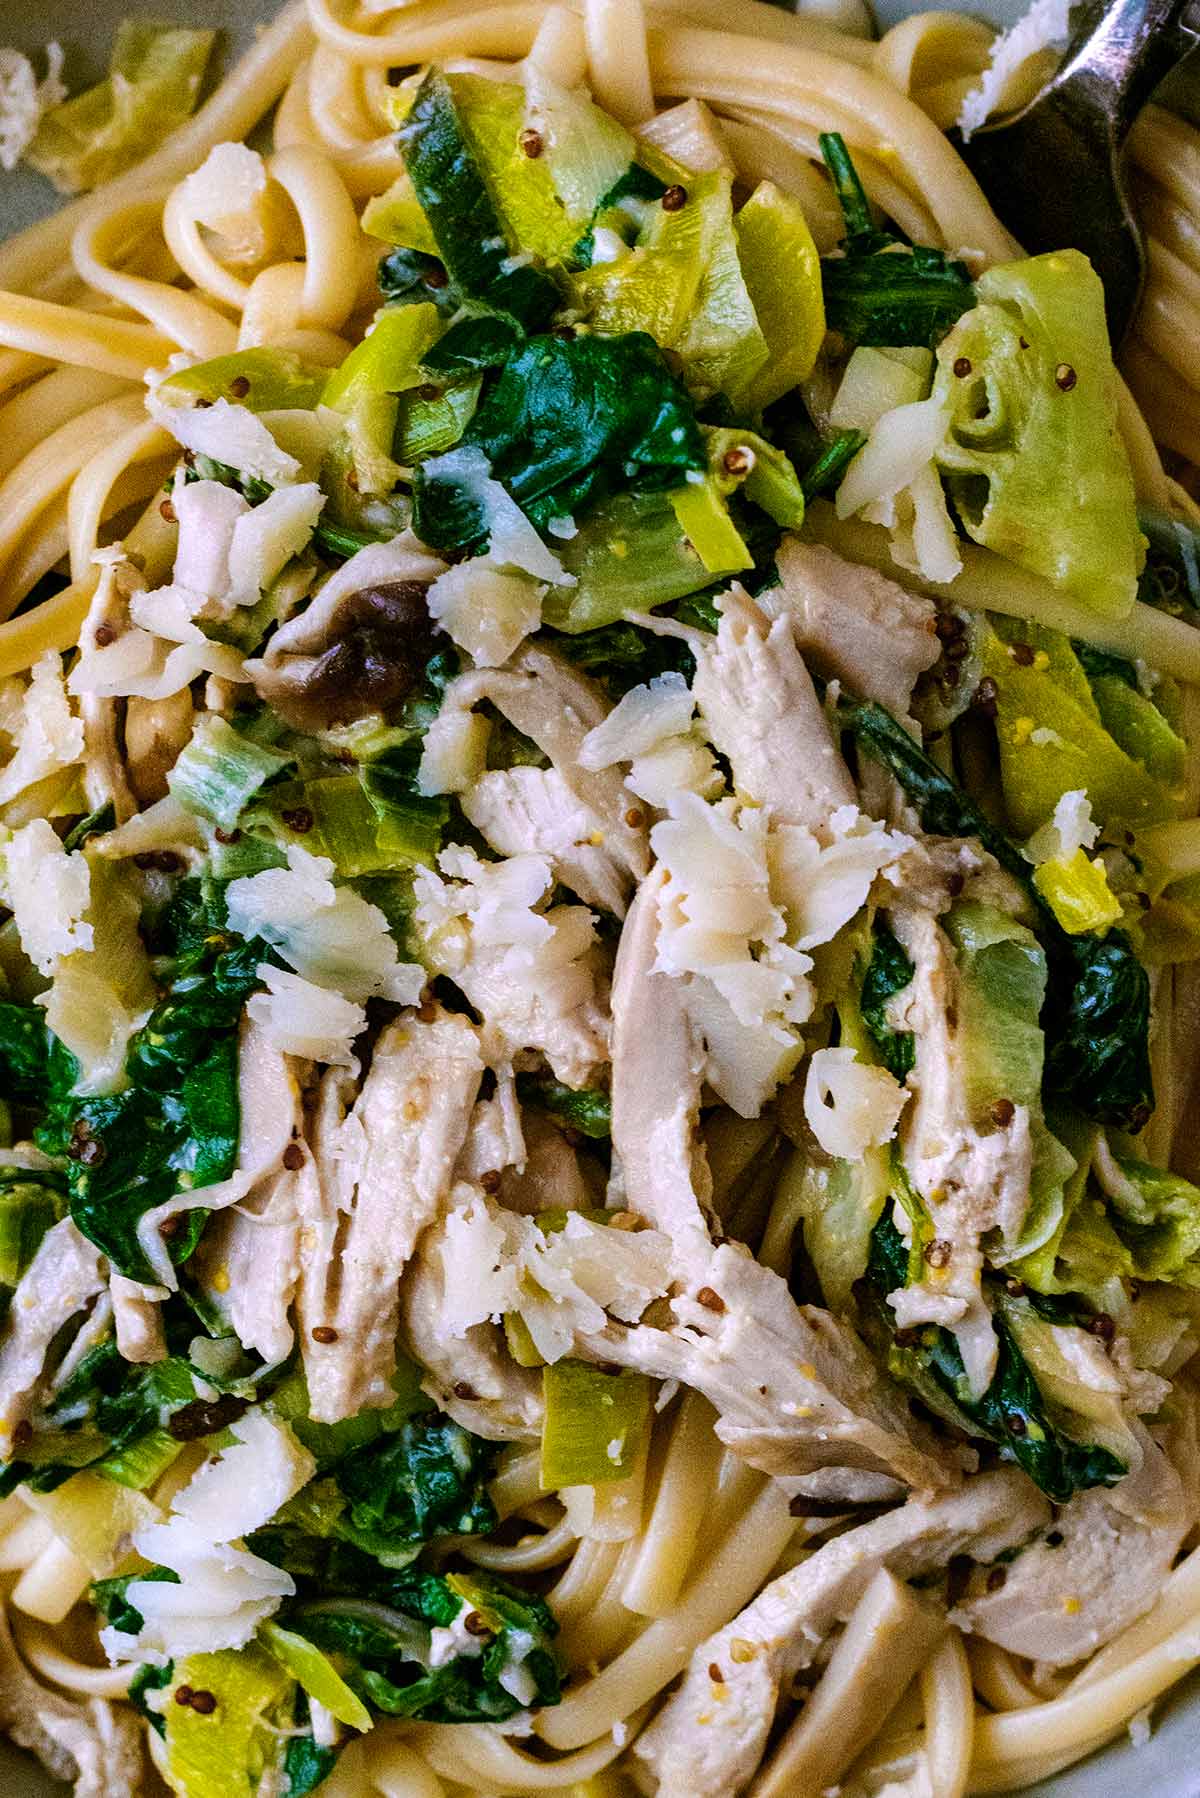 Leftover turkey mixed into pasta with leeks and spinach.